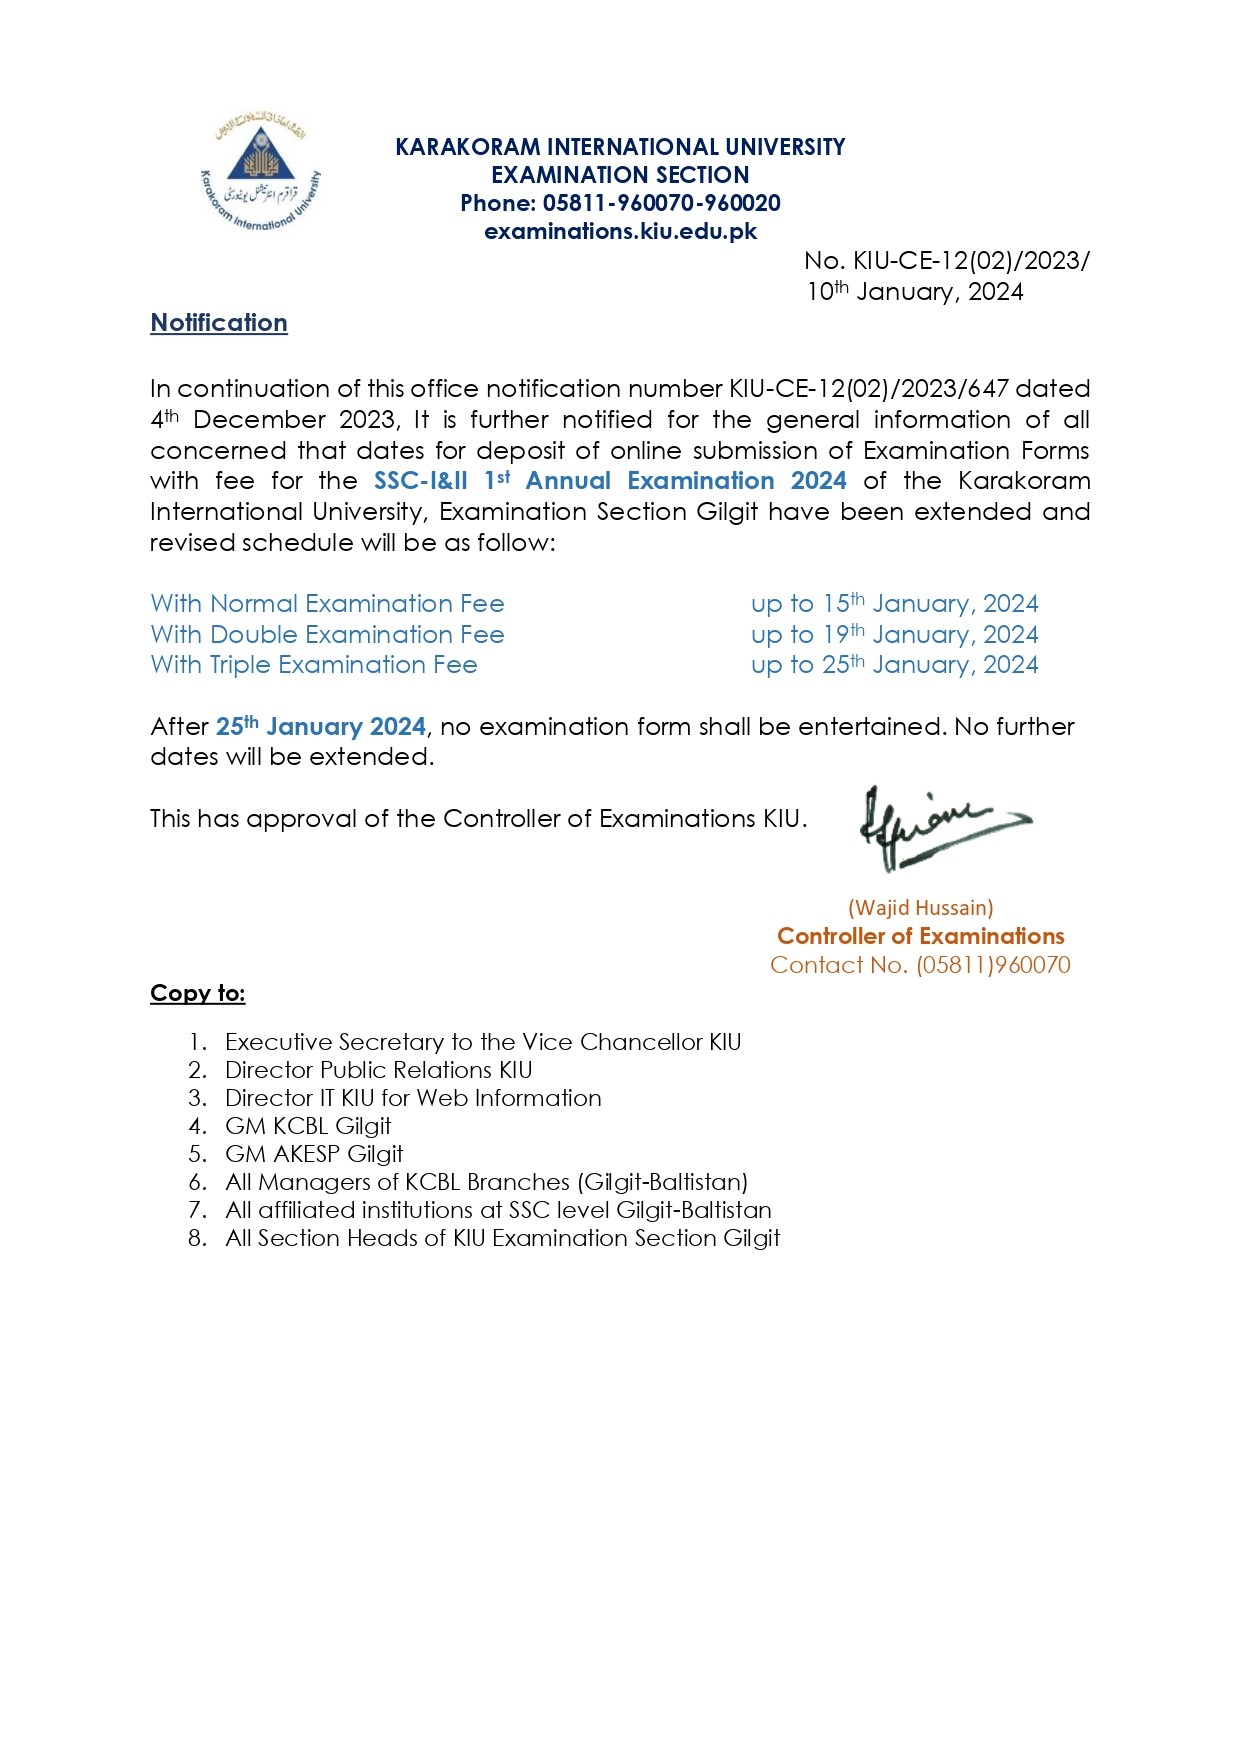 SSC First Annual Examination 2024 Exam Form Fee Extension